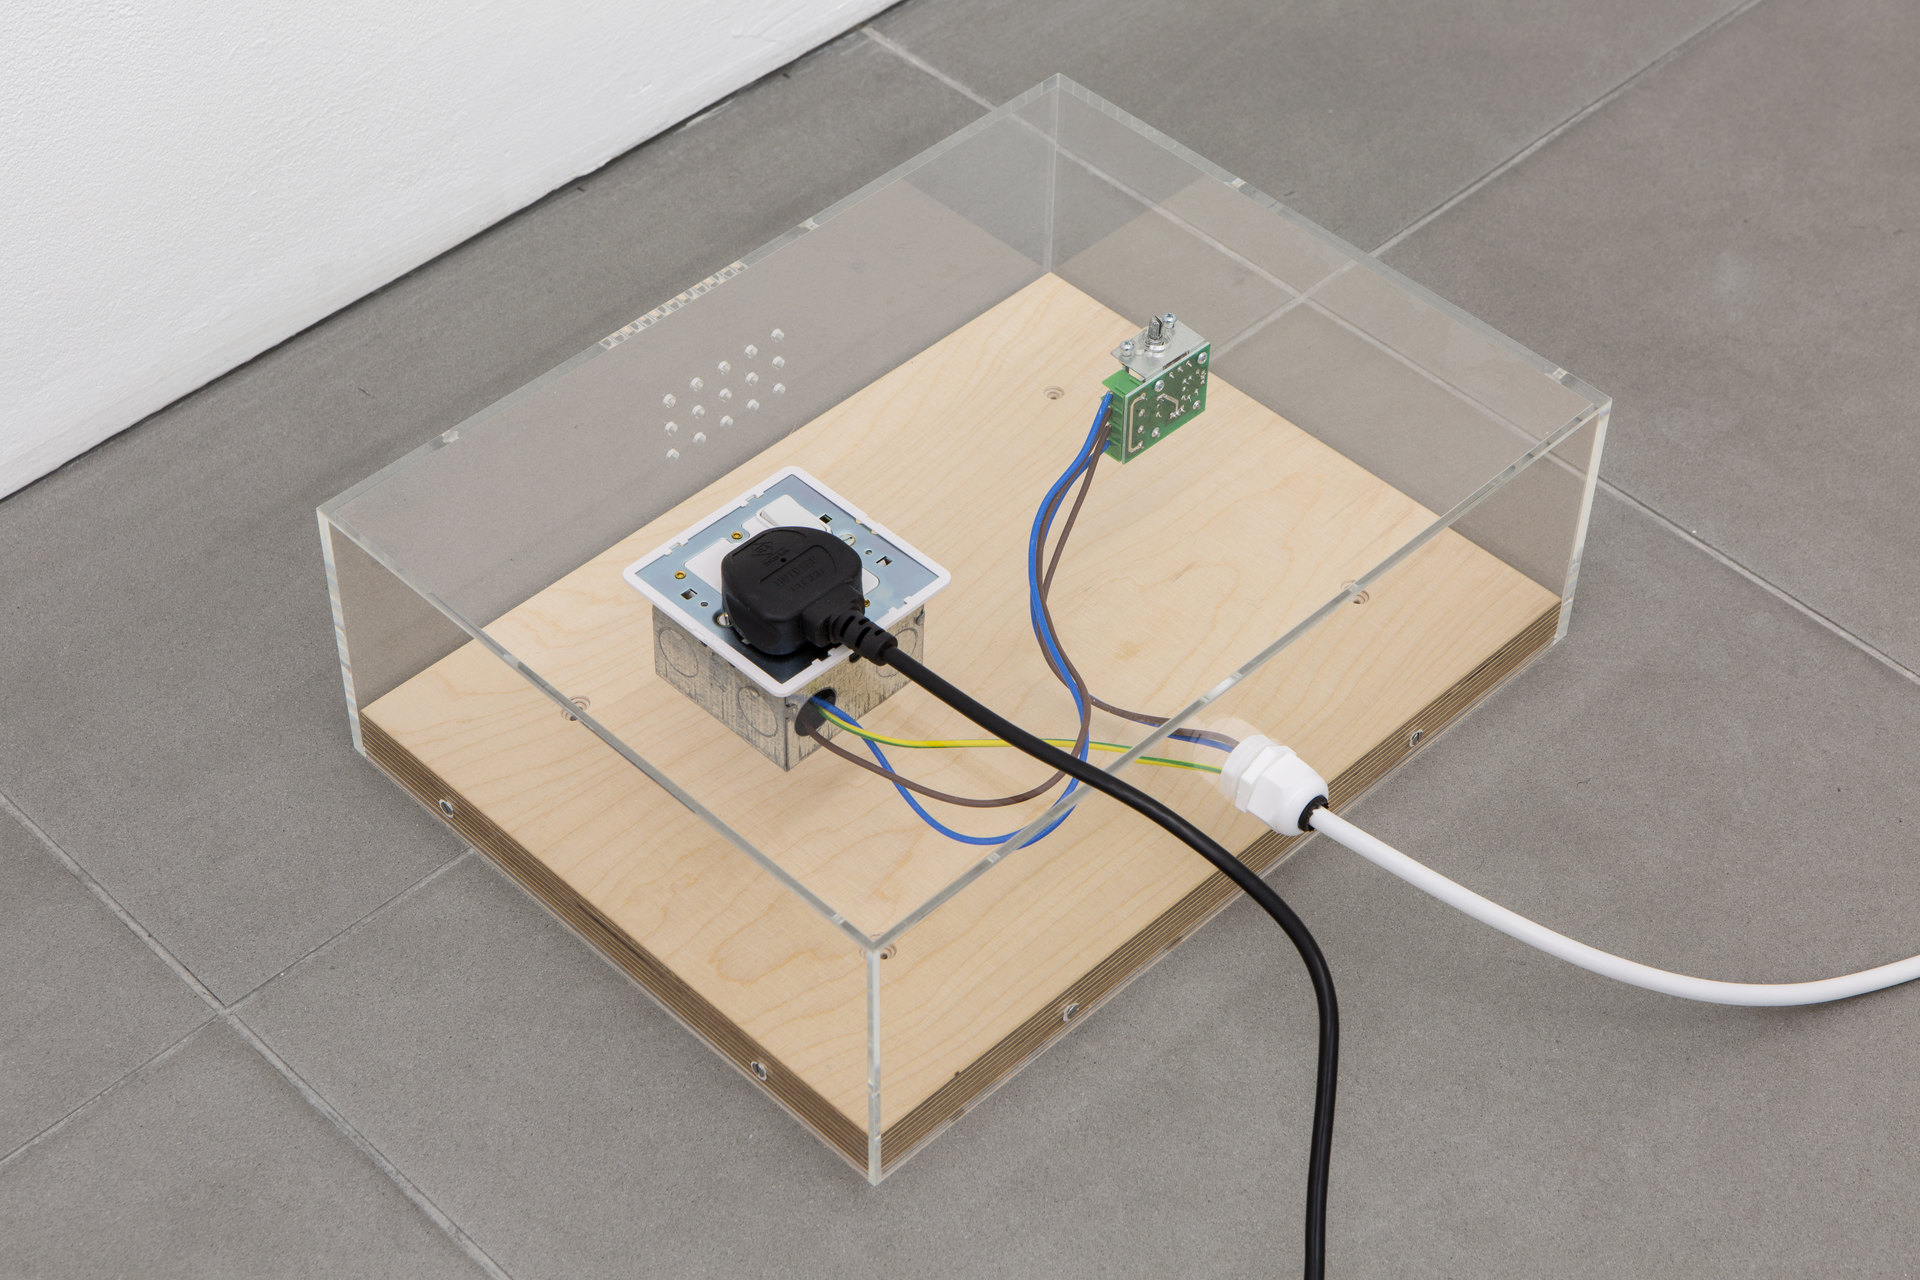 Patricia L. Boyd, 'Treatment', 2019, Fan, socket, motor speed control, electrical cable, cable gland, acrylic, plywood, fixings, Cell Project Space